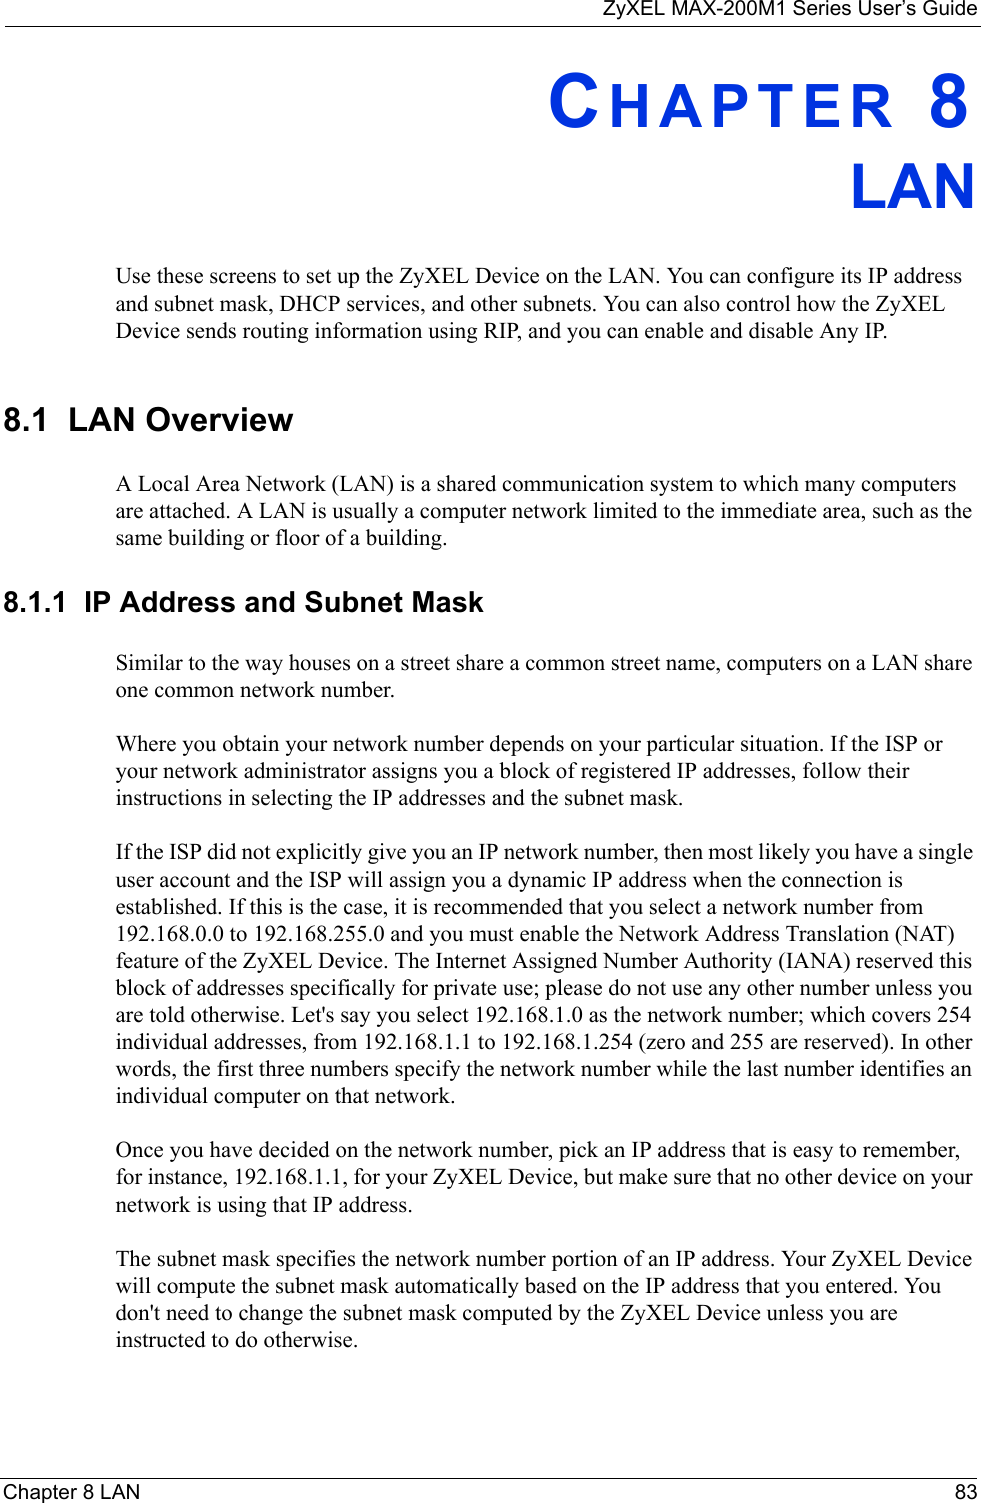 ZyXEL MAX-200M1 Series User’s GuideChapter 8 LAN 83CHAPTER 8LANUse these screens to set up the ZyXEL Device on the LAN. You can configure its IP address and subnet mask, DHCP services, and other subnets. You can also control how the ZyXEL Device sends routing information using RIP, and you can enable and disable Any IP.8.1  LAN OverviewA Local Area Network (LAN) is a shared communication system to which many computers are attached. A LAN is usually a computer network limited to the immediate area, such as the same building or floor of a building.8.1.1  IP Address and Subnet MaskSimilar to the way houses on a street share a common street name, computers on a LAN share one common network number.Where you obtain your network number depends on your particular situation. If the ISP or your network administrator assigns you a block of registered IP addresses, follow their instructions in selecting the IP addresses and the subnet mask.If the ISP did not explicitly give you an IP network number, then most likely you have a single user account and the ISP will assign you a dynamic IP address when the connection is established. If this is the case, it is recommended that you select a network number from 192.168.0.0 to 192.168.255.0 and you must enable the Network Address Translation (NAT) feature of the ZyXEL Device. The Internet Assigned Number Authority (IANA) reserved this block of addresses specifically for private use; please do not use any other number unless you are told otherwise. Let&apos;s say you select 192.168.1.0 as the network number; which covers 254 individual addresses, from 192.168.1.1 to 192.168.1.254 (zero and 255 are reserved). In other words, the first three numbers specify the network number while the last number identifies an individual computer on that network.Once you have decided on the network number, pick an IP address that is easy to remember, for instance, 192.168.1.1, for your ZyXEL Device, but make sure that no other device on your network is using that IP address.The subnet mask specifies the network number portion of an IP address. Your ZyXEL Device will compute the subnet mask automatically based on the IP address that you entered. You don&apos;t need to change the subnet mask computed by the ZyXEL Device unless you are instructed to do otherwise.